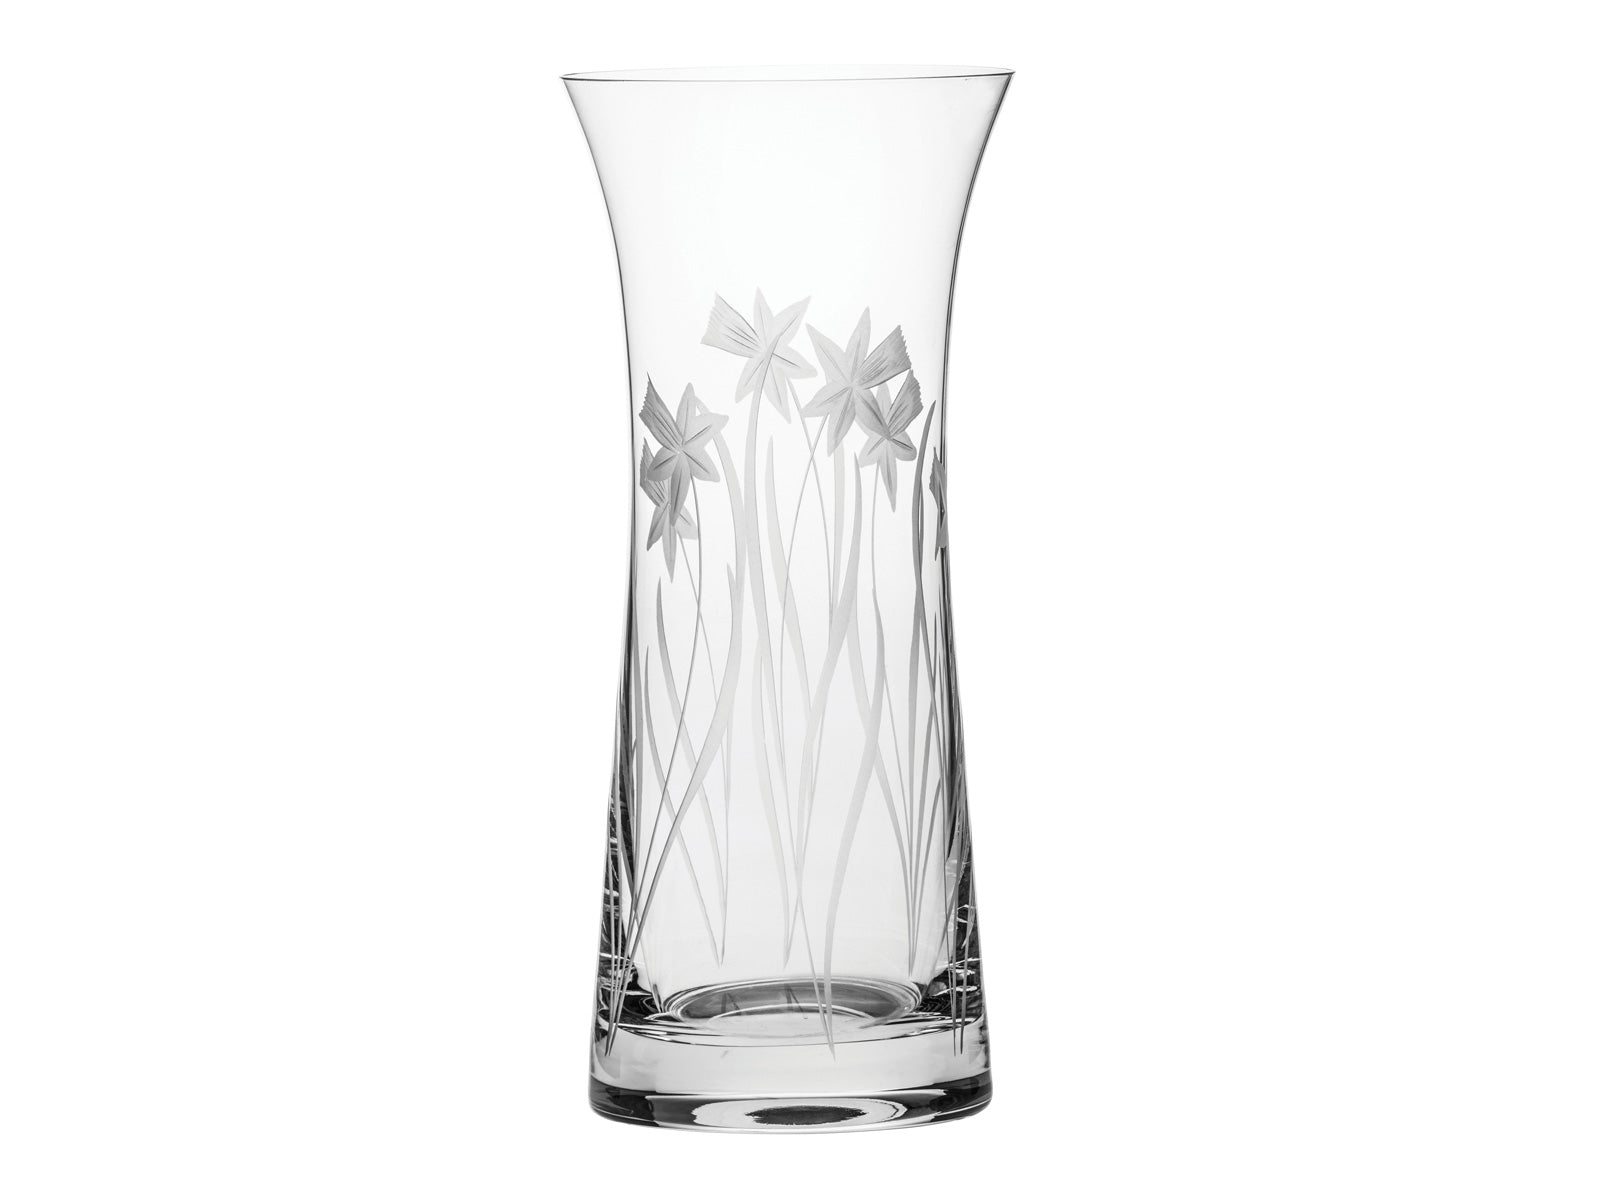 A crystal vase that is tall and flared at the top, engraved with daffodils on the outside.